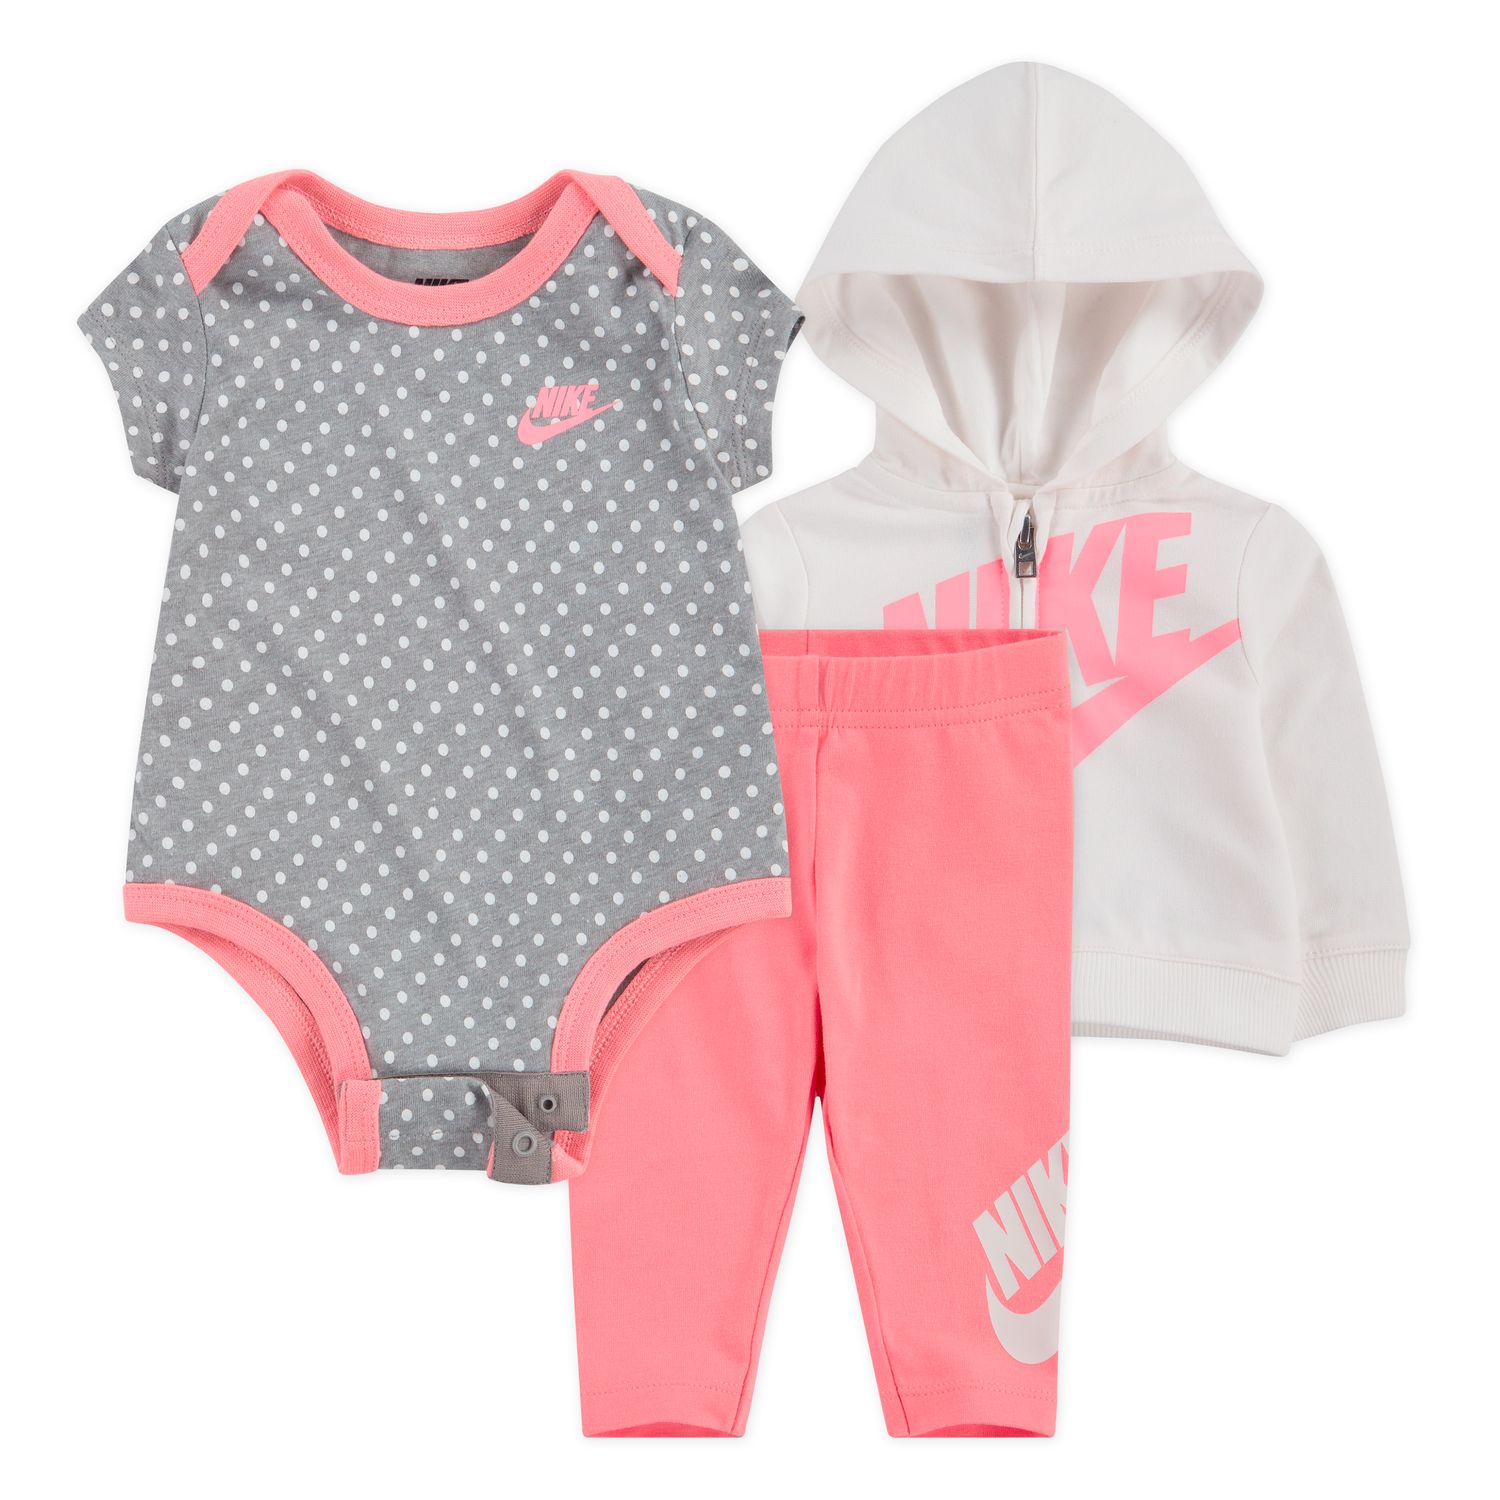 Baby Winter Clothes Hotsell, 56% OFF | www.visitmontanejos.com